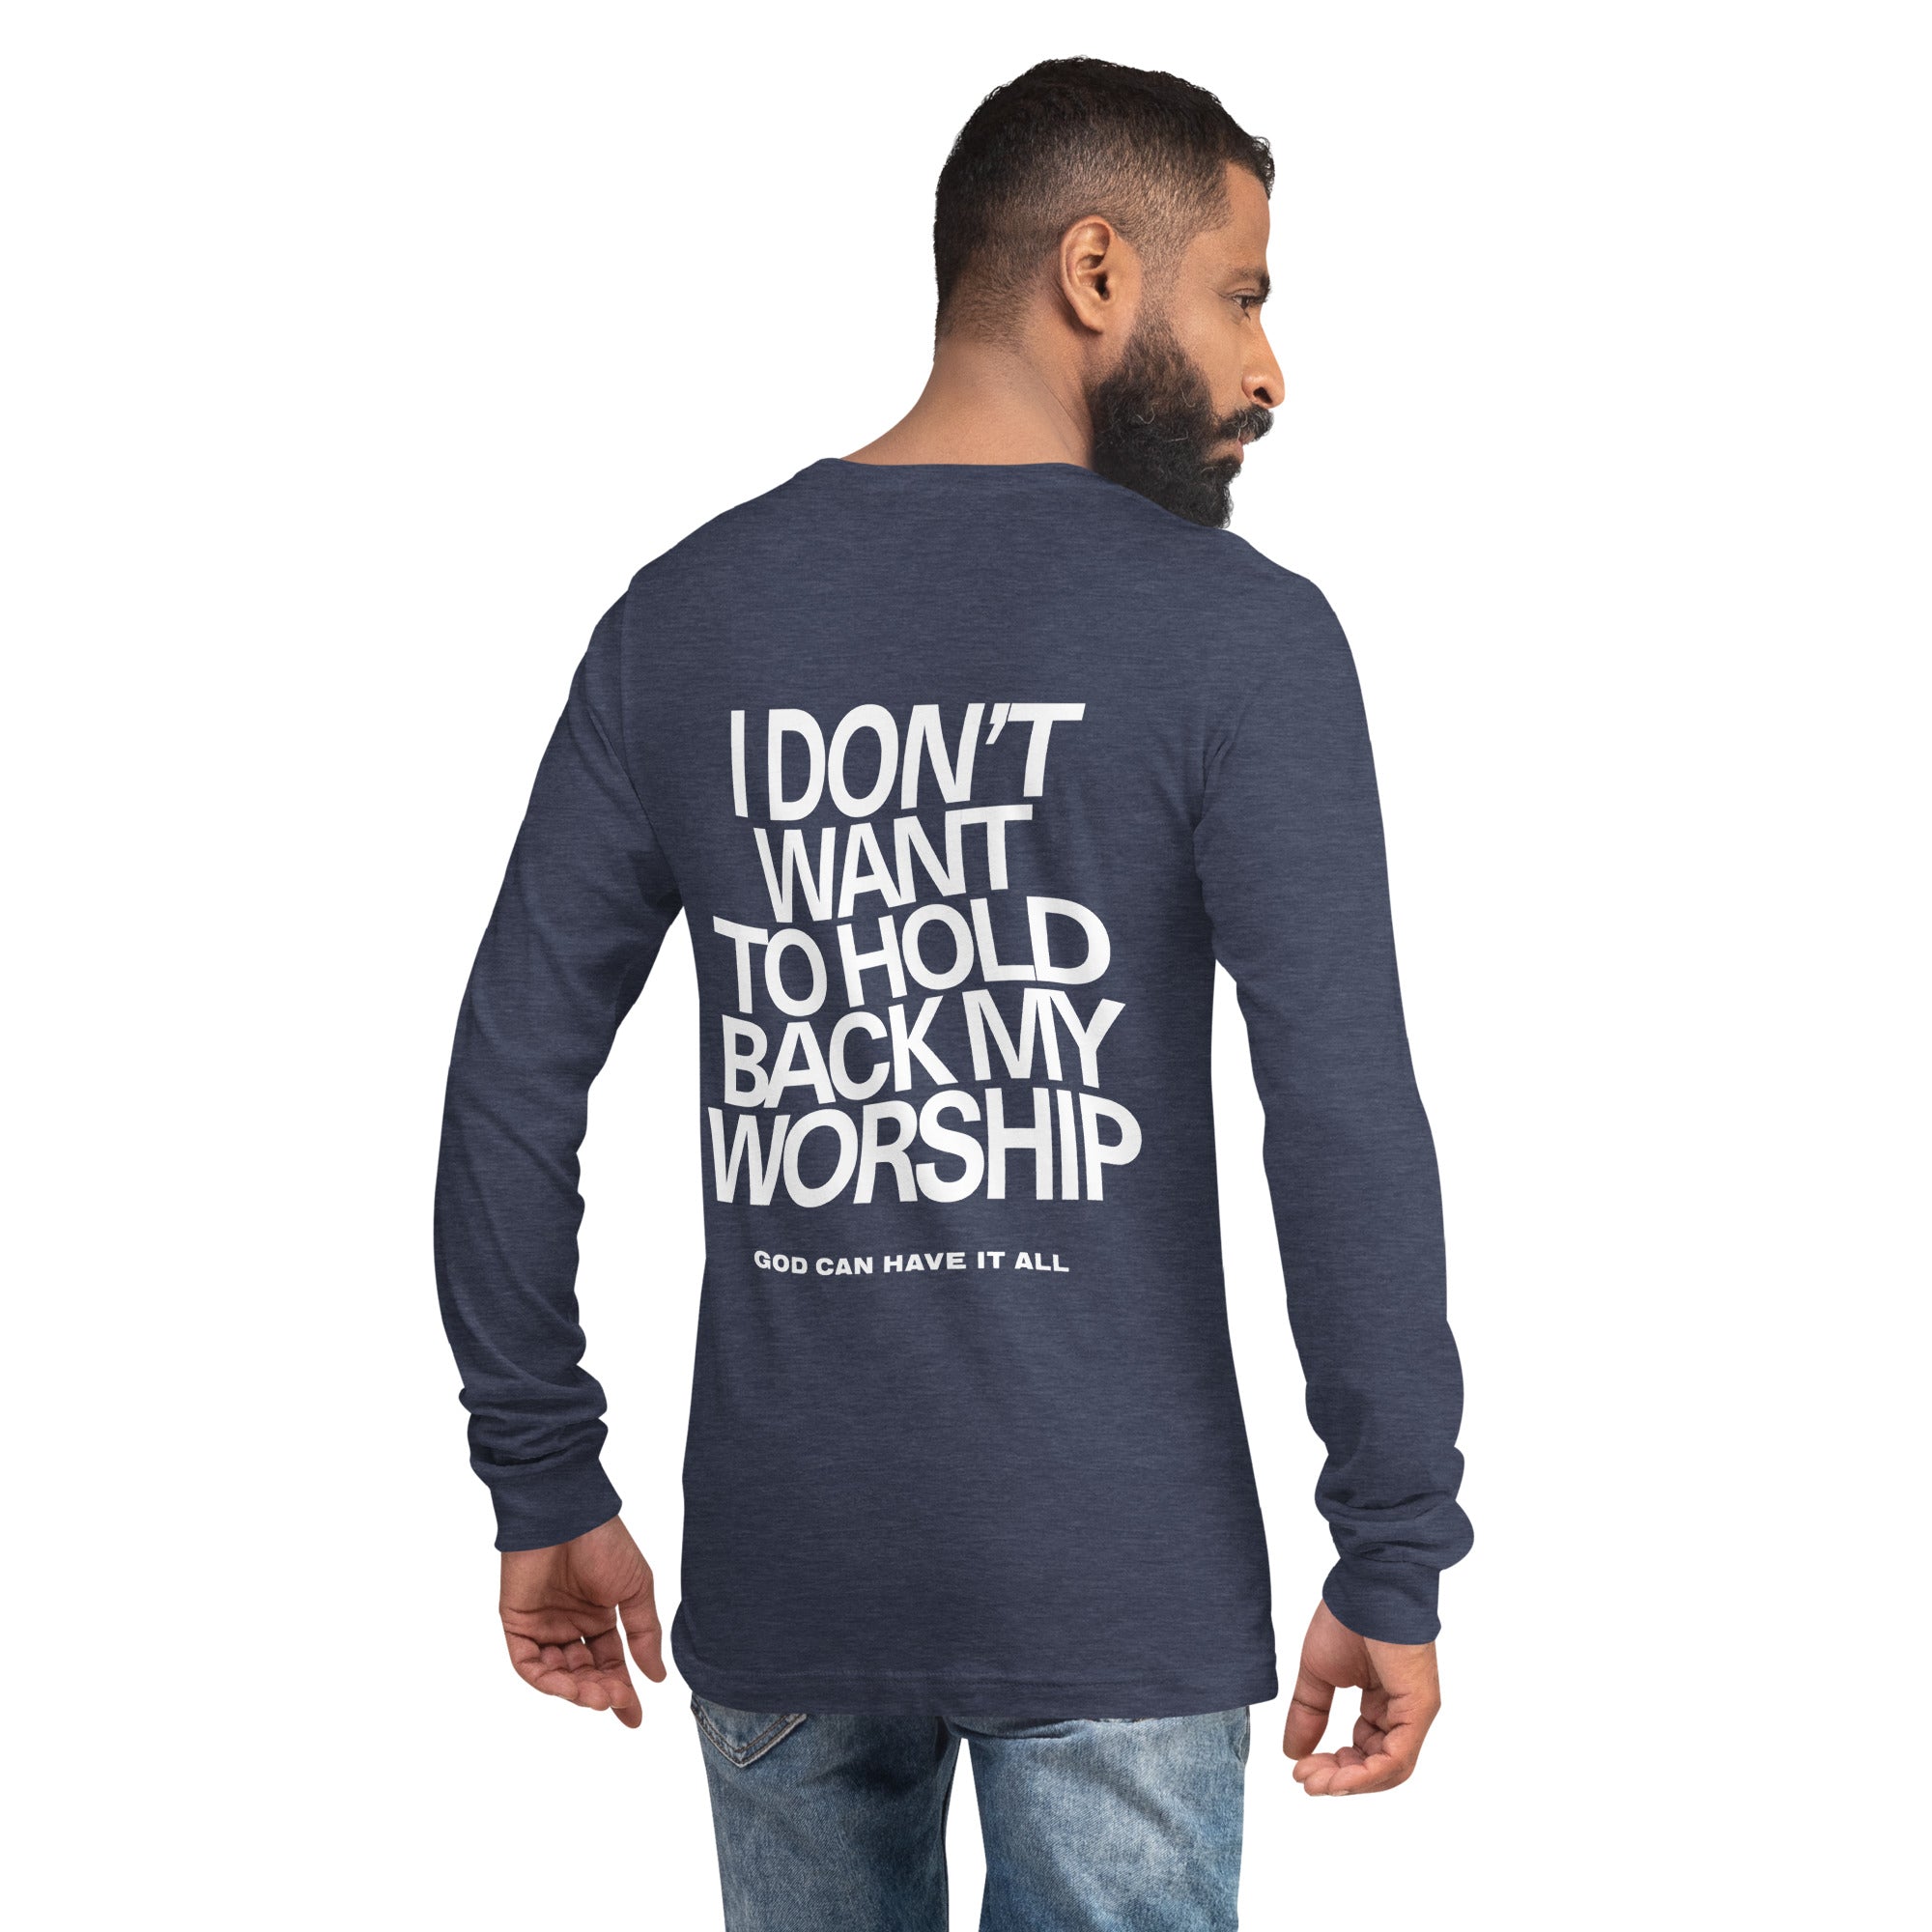 We Don't Hold Back Our Worship Unisex Long Sleeve Tee